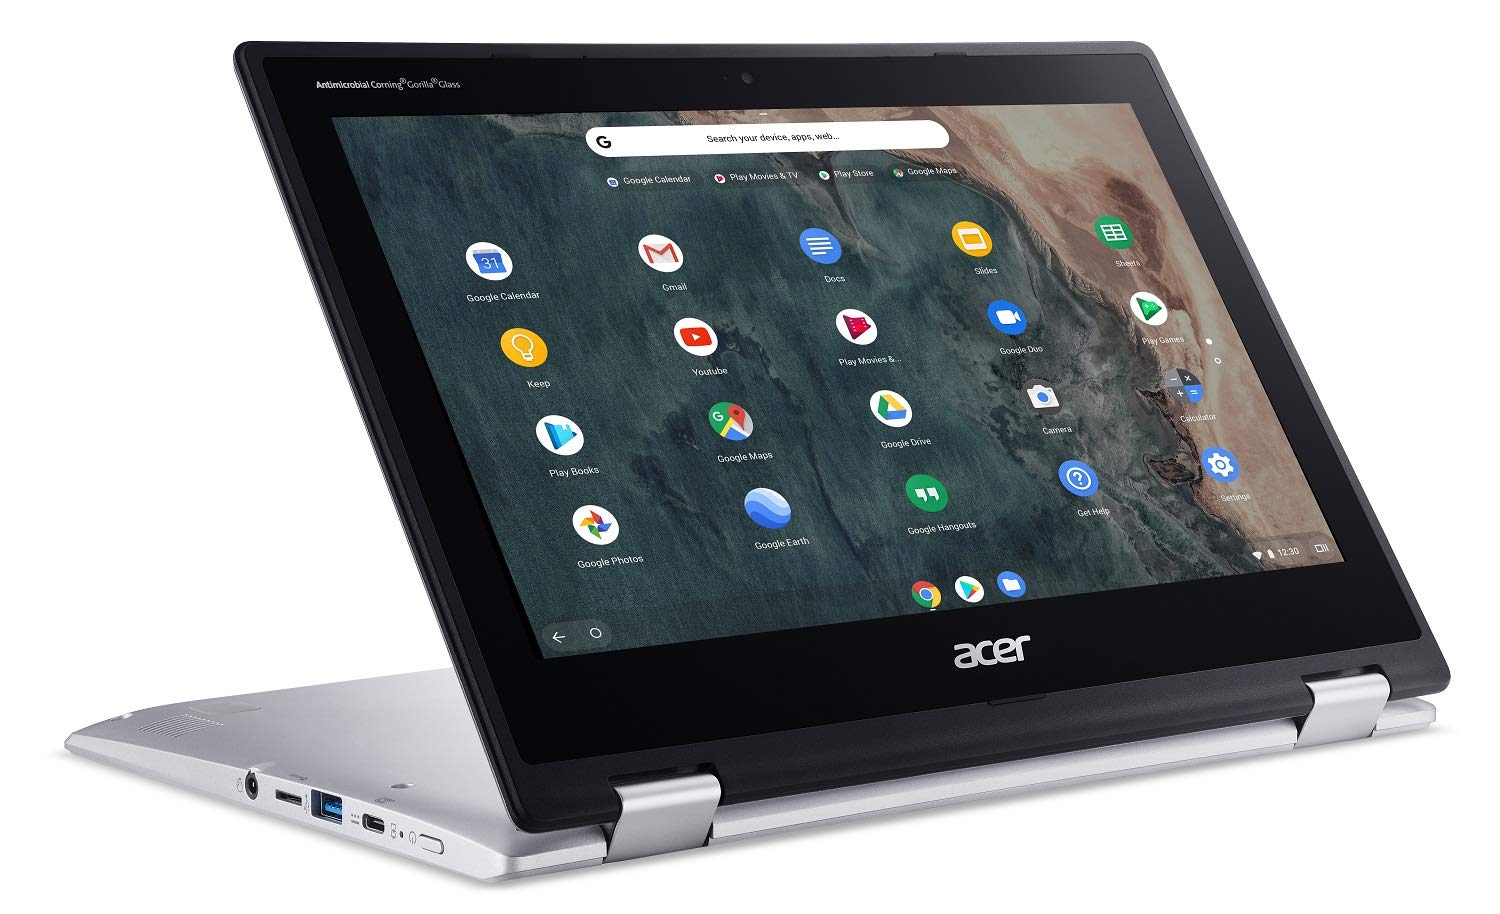 The Acer Chromebook Spin 311 against a white background